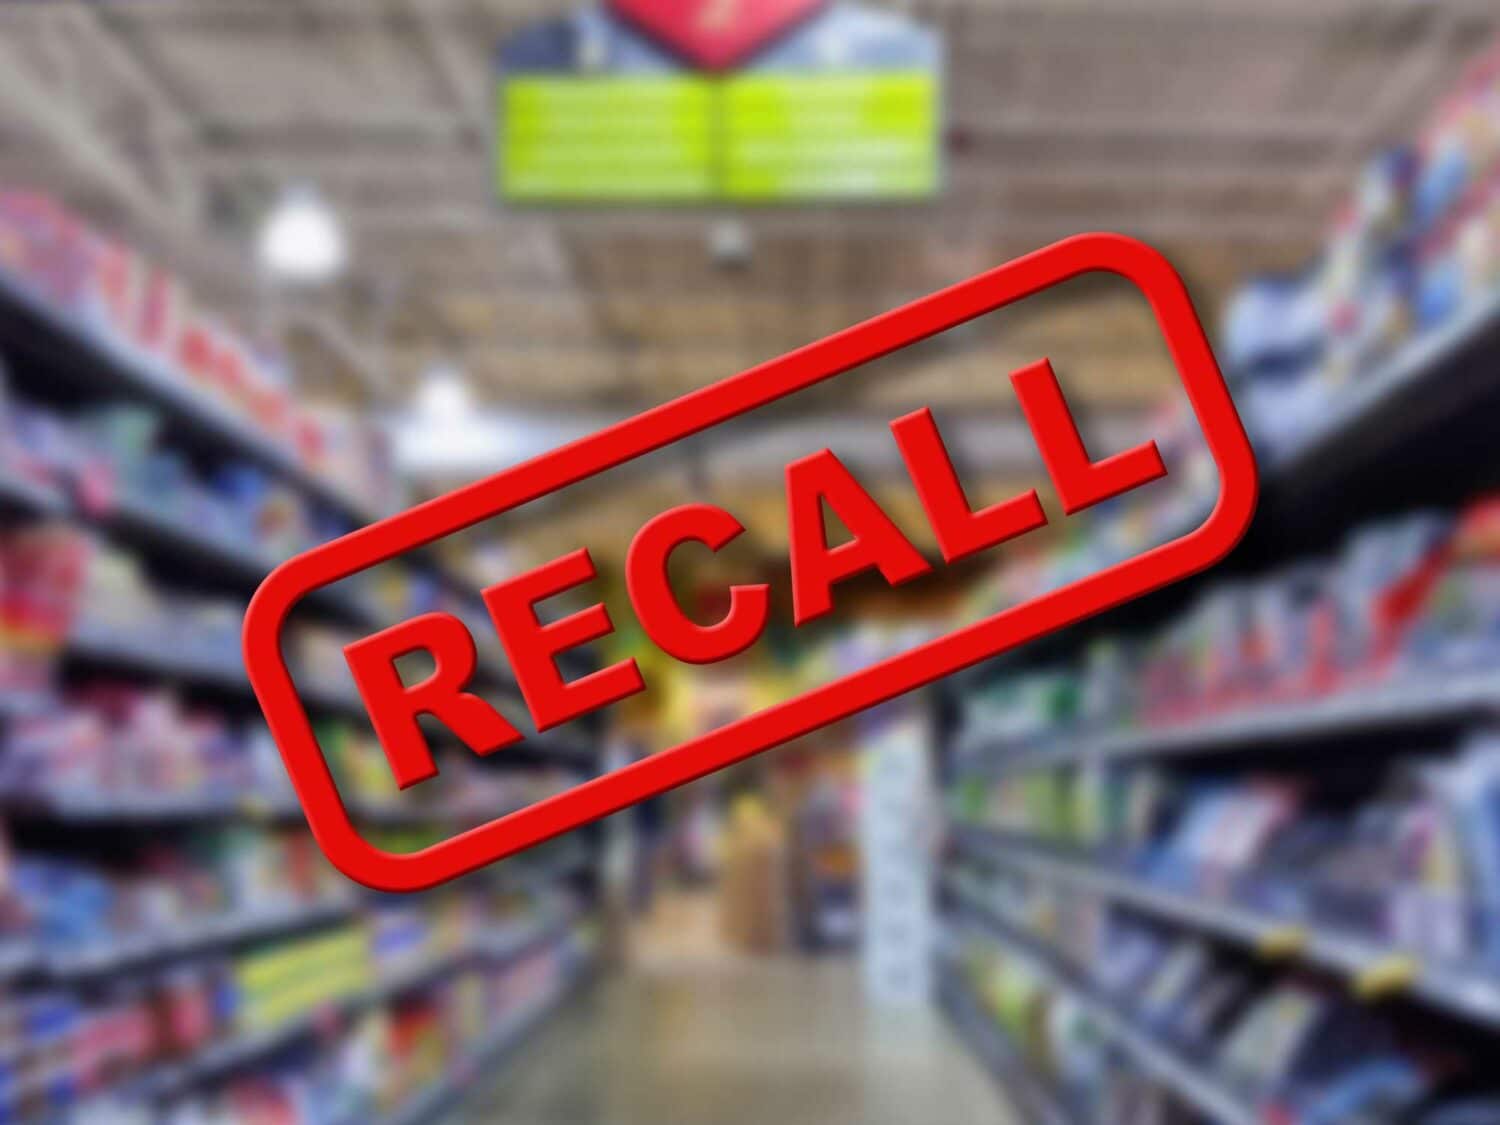 Initiate and Execute an FDA Recall to Quickly Remove Potentially Violative Product